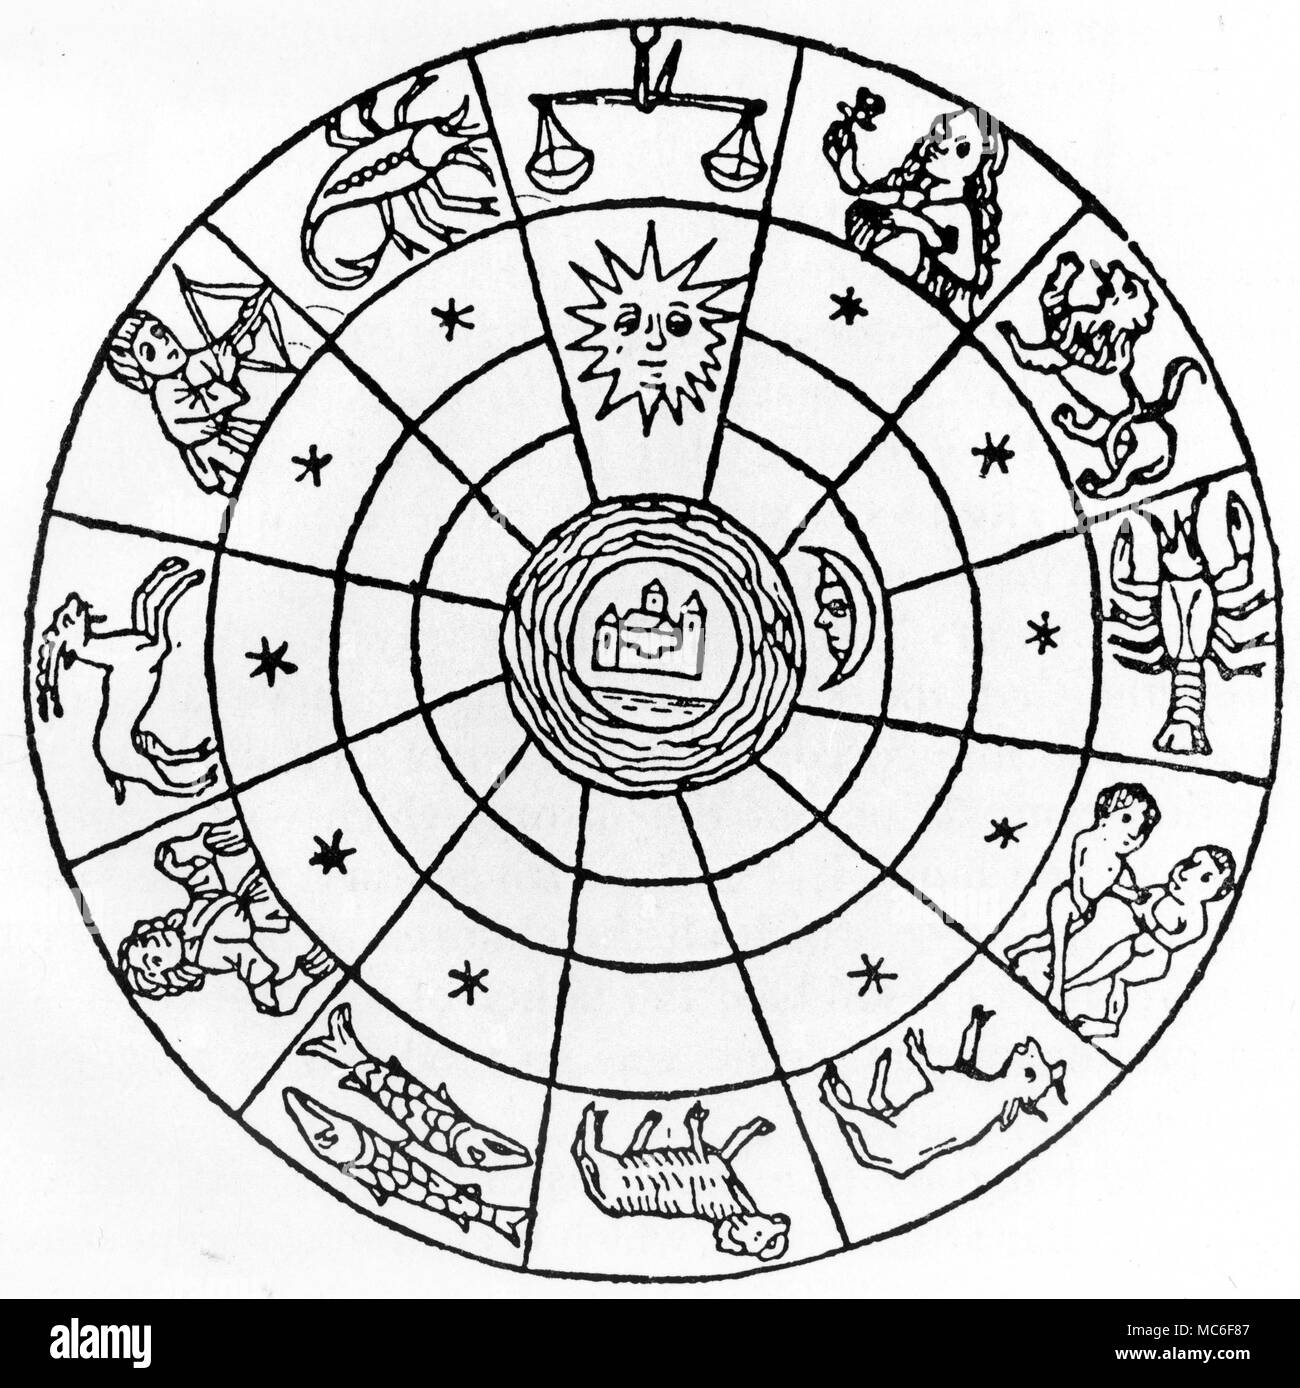 Late fifteenth century zodiac woodcut, with the Sun in Lirba and Moon on the cusp of Leo and Cancer. This is almost certainly a Thema Mundi - a horoscope for the creation of the World. At the centre is jerusalem, the omphalos of the earth. Stock Photo